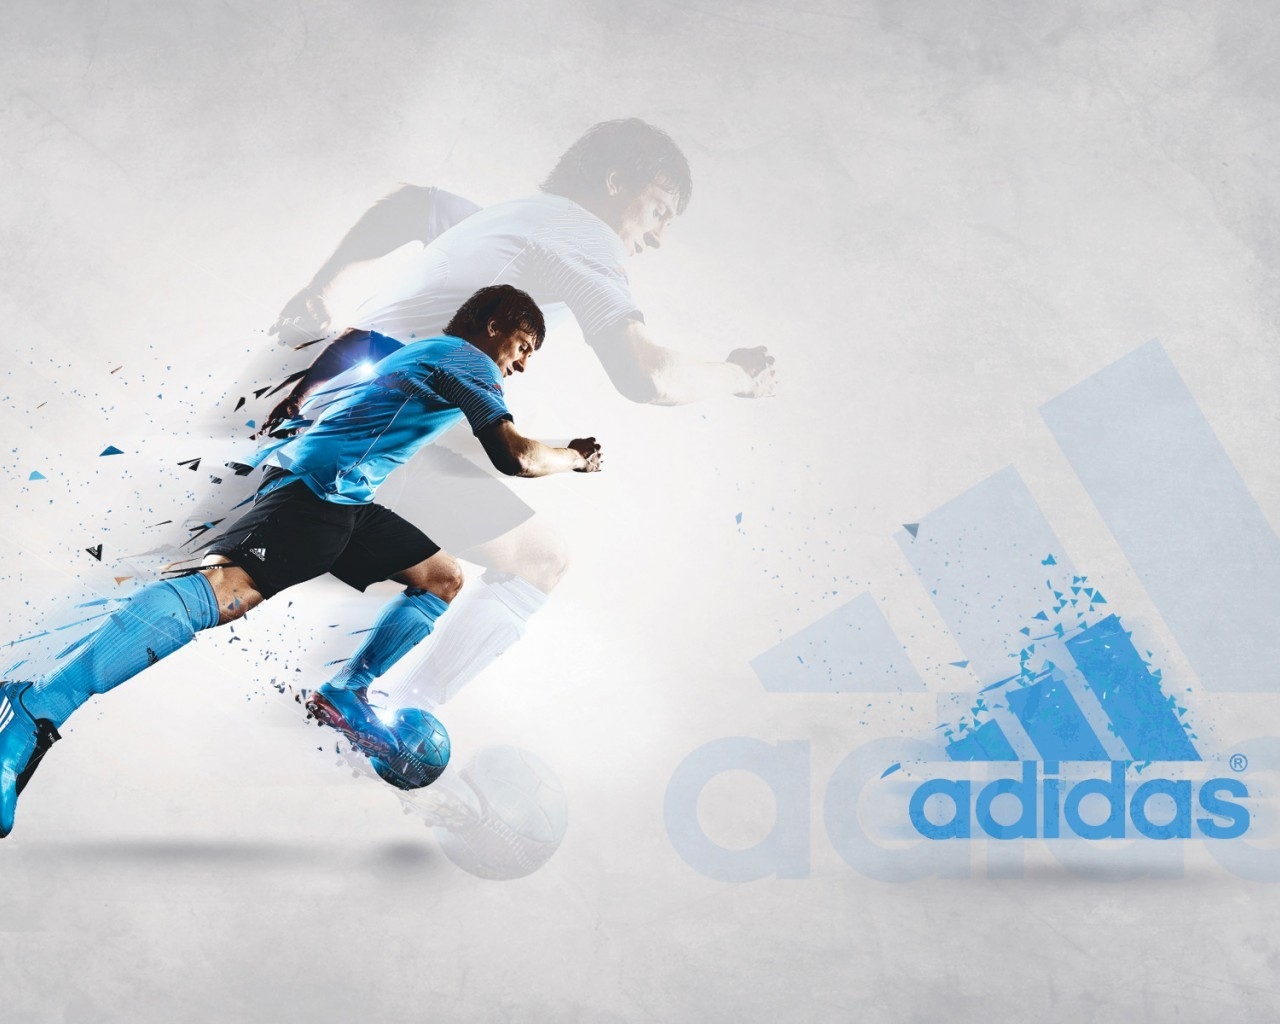 Adidas Poster for 1280 x 1024 resolution